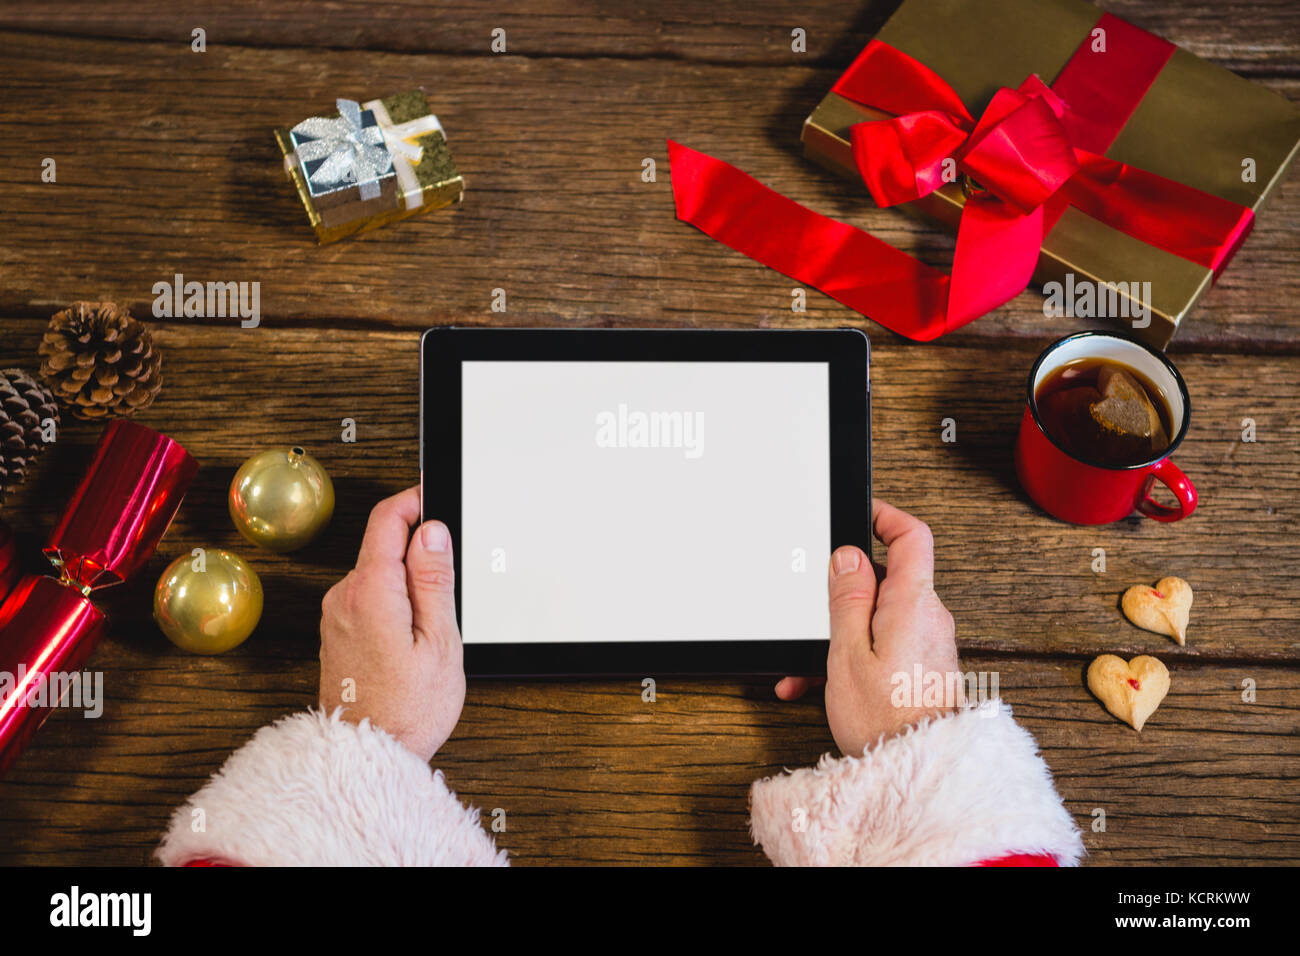 Hands of Santa Claus holding digital tablet Stock Photo